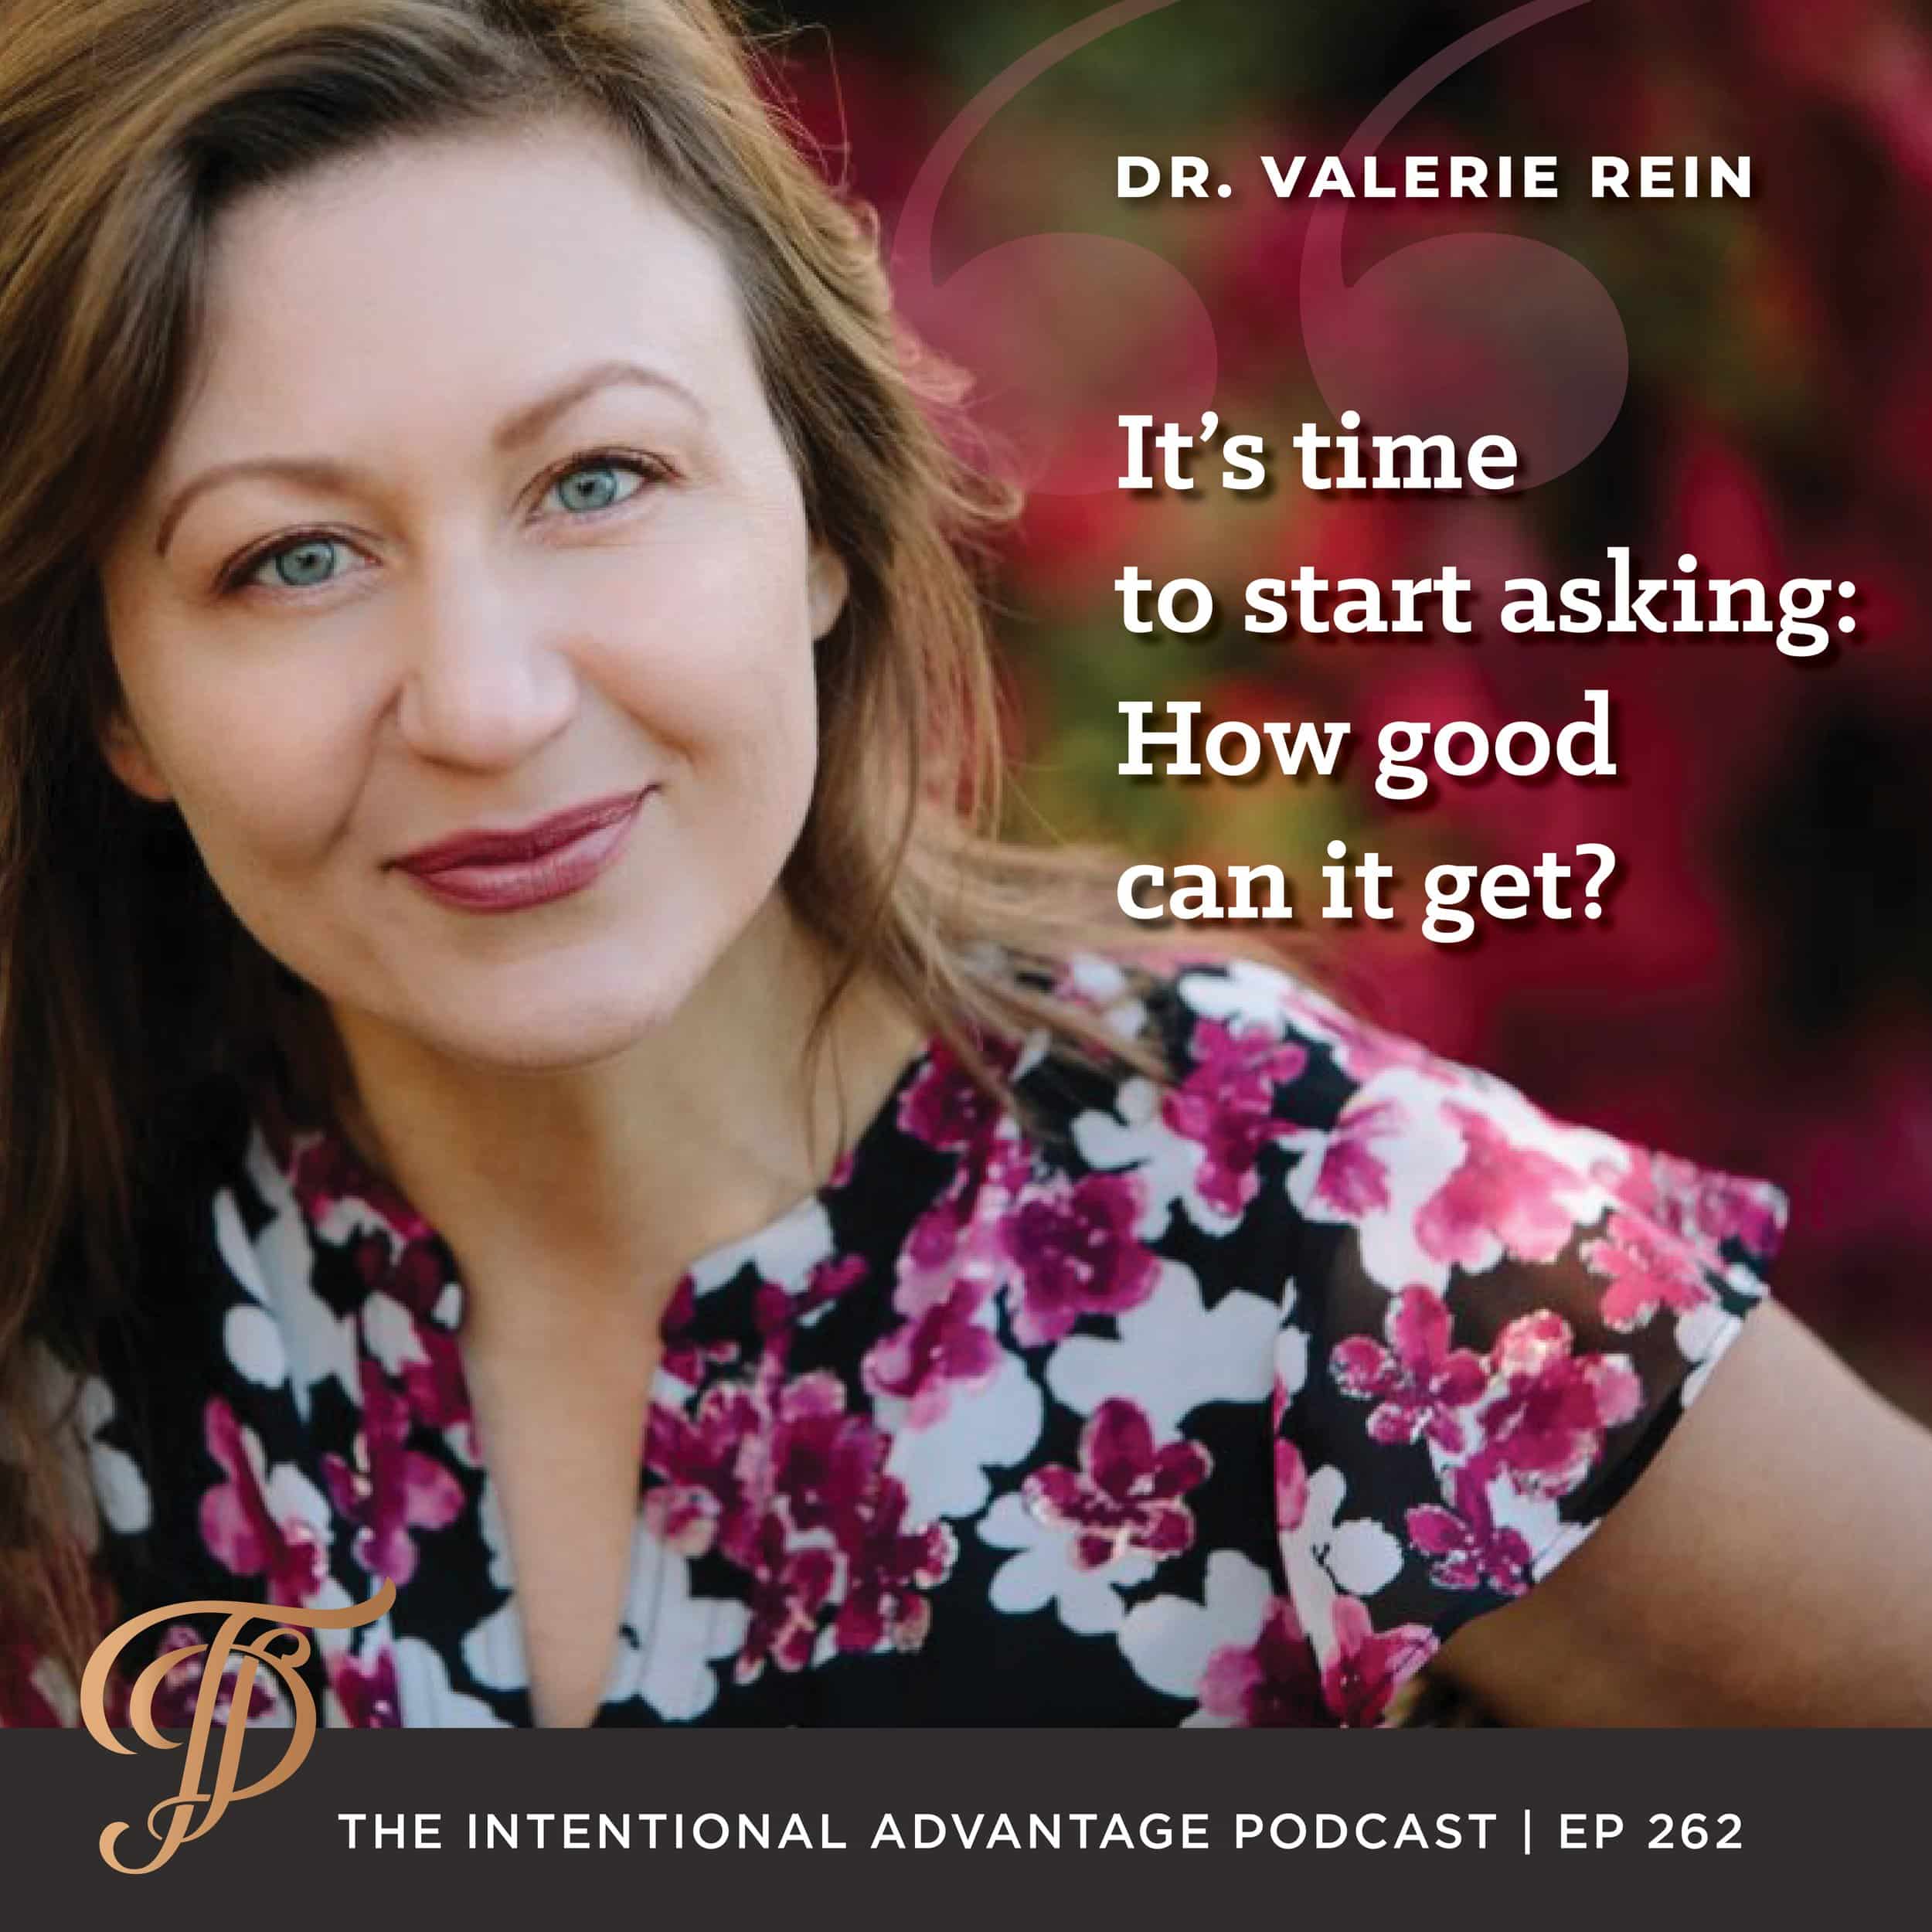 Valerie Rein podcast interview on The Intentional Advantage